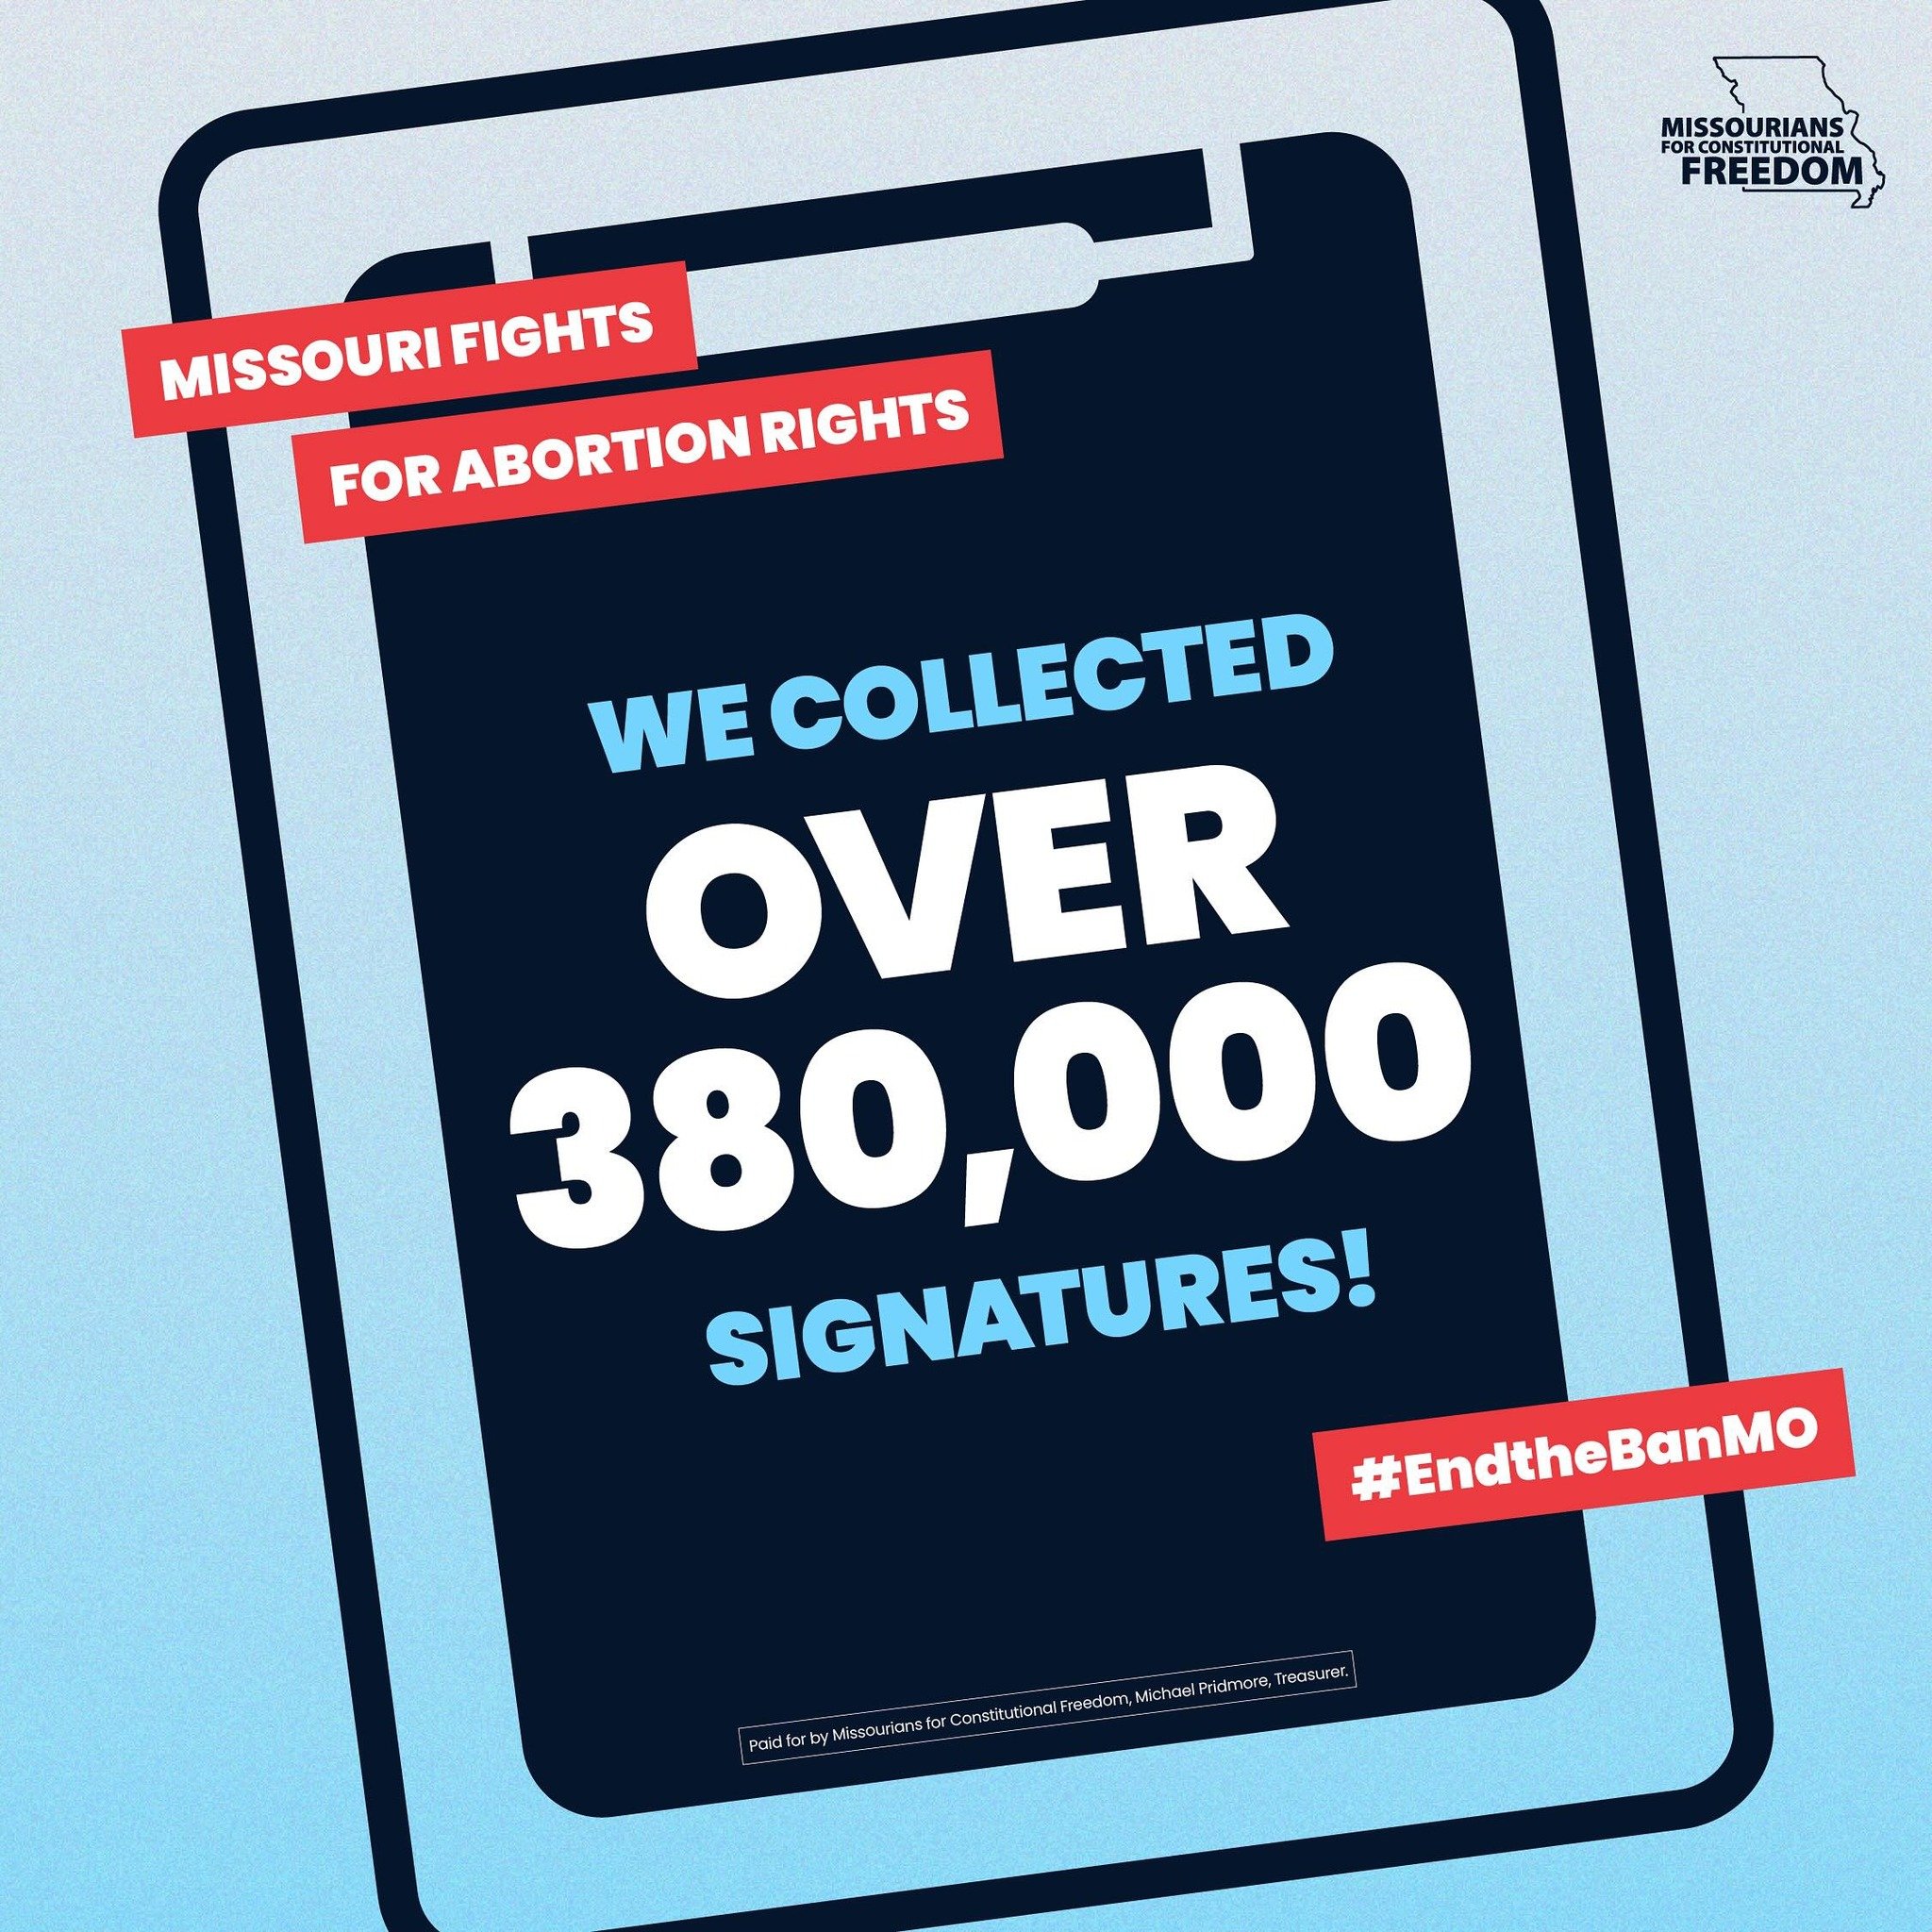 📢More than 380k Missourians, from EVERY corner of our state, signed the petition to put
abortion on the ballot and #EndTheBanMO! Follow @moconstitutionalfreedom and sign up at the link in
their bio to join this historic campaign. 📢

*****

📢M&aacu